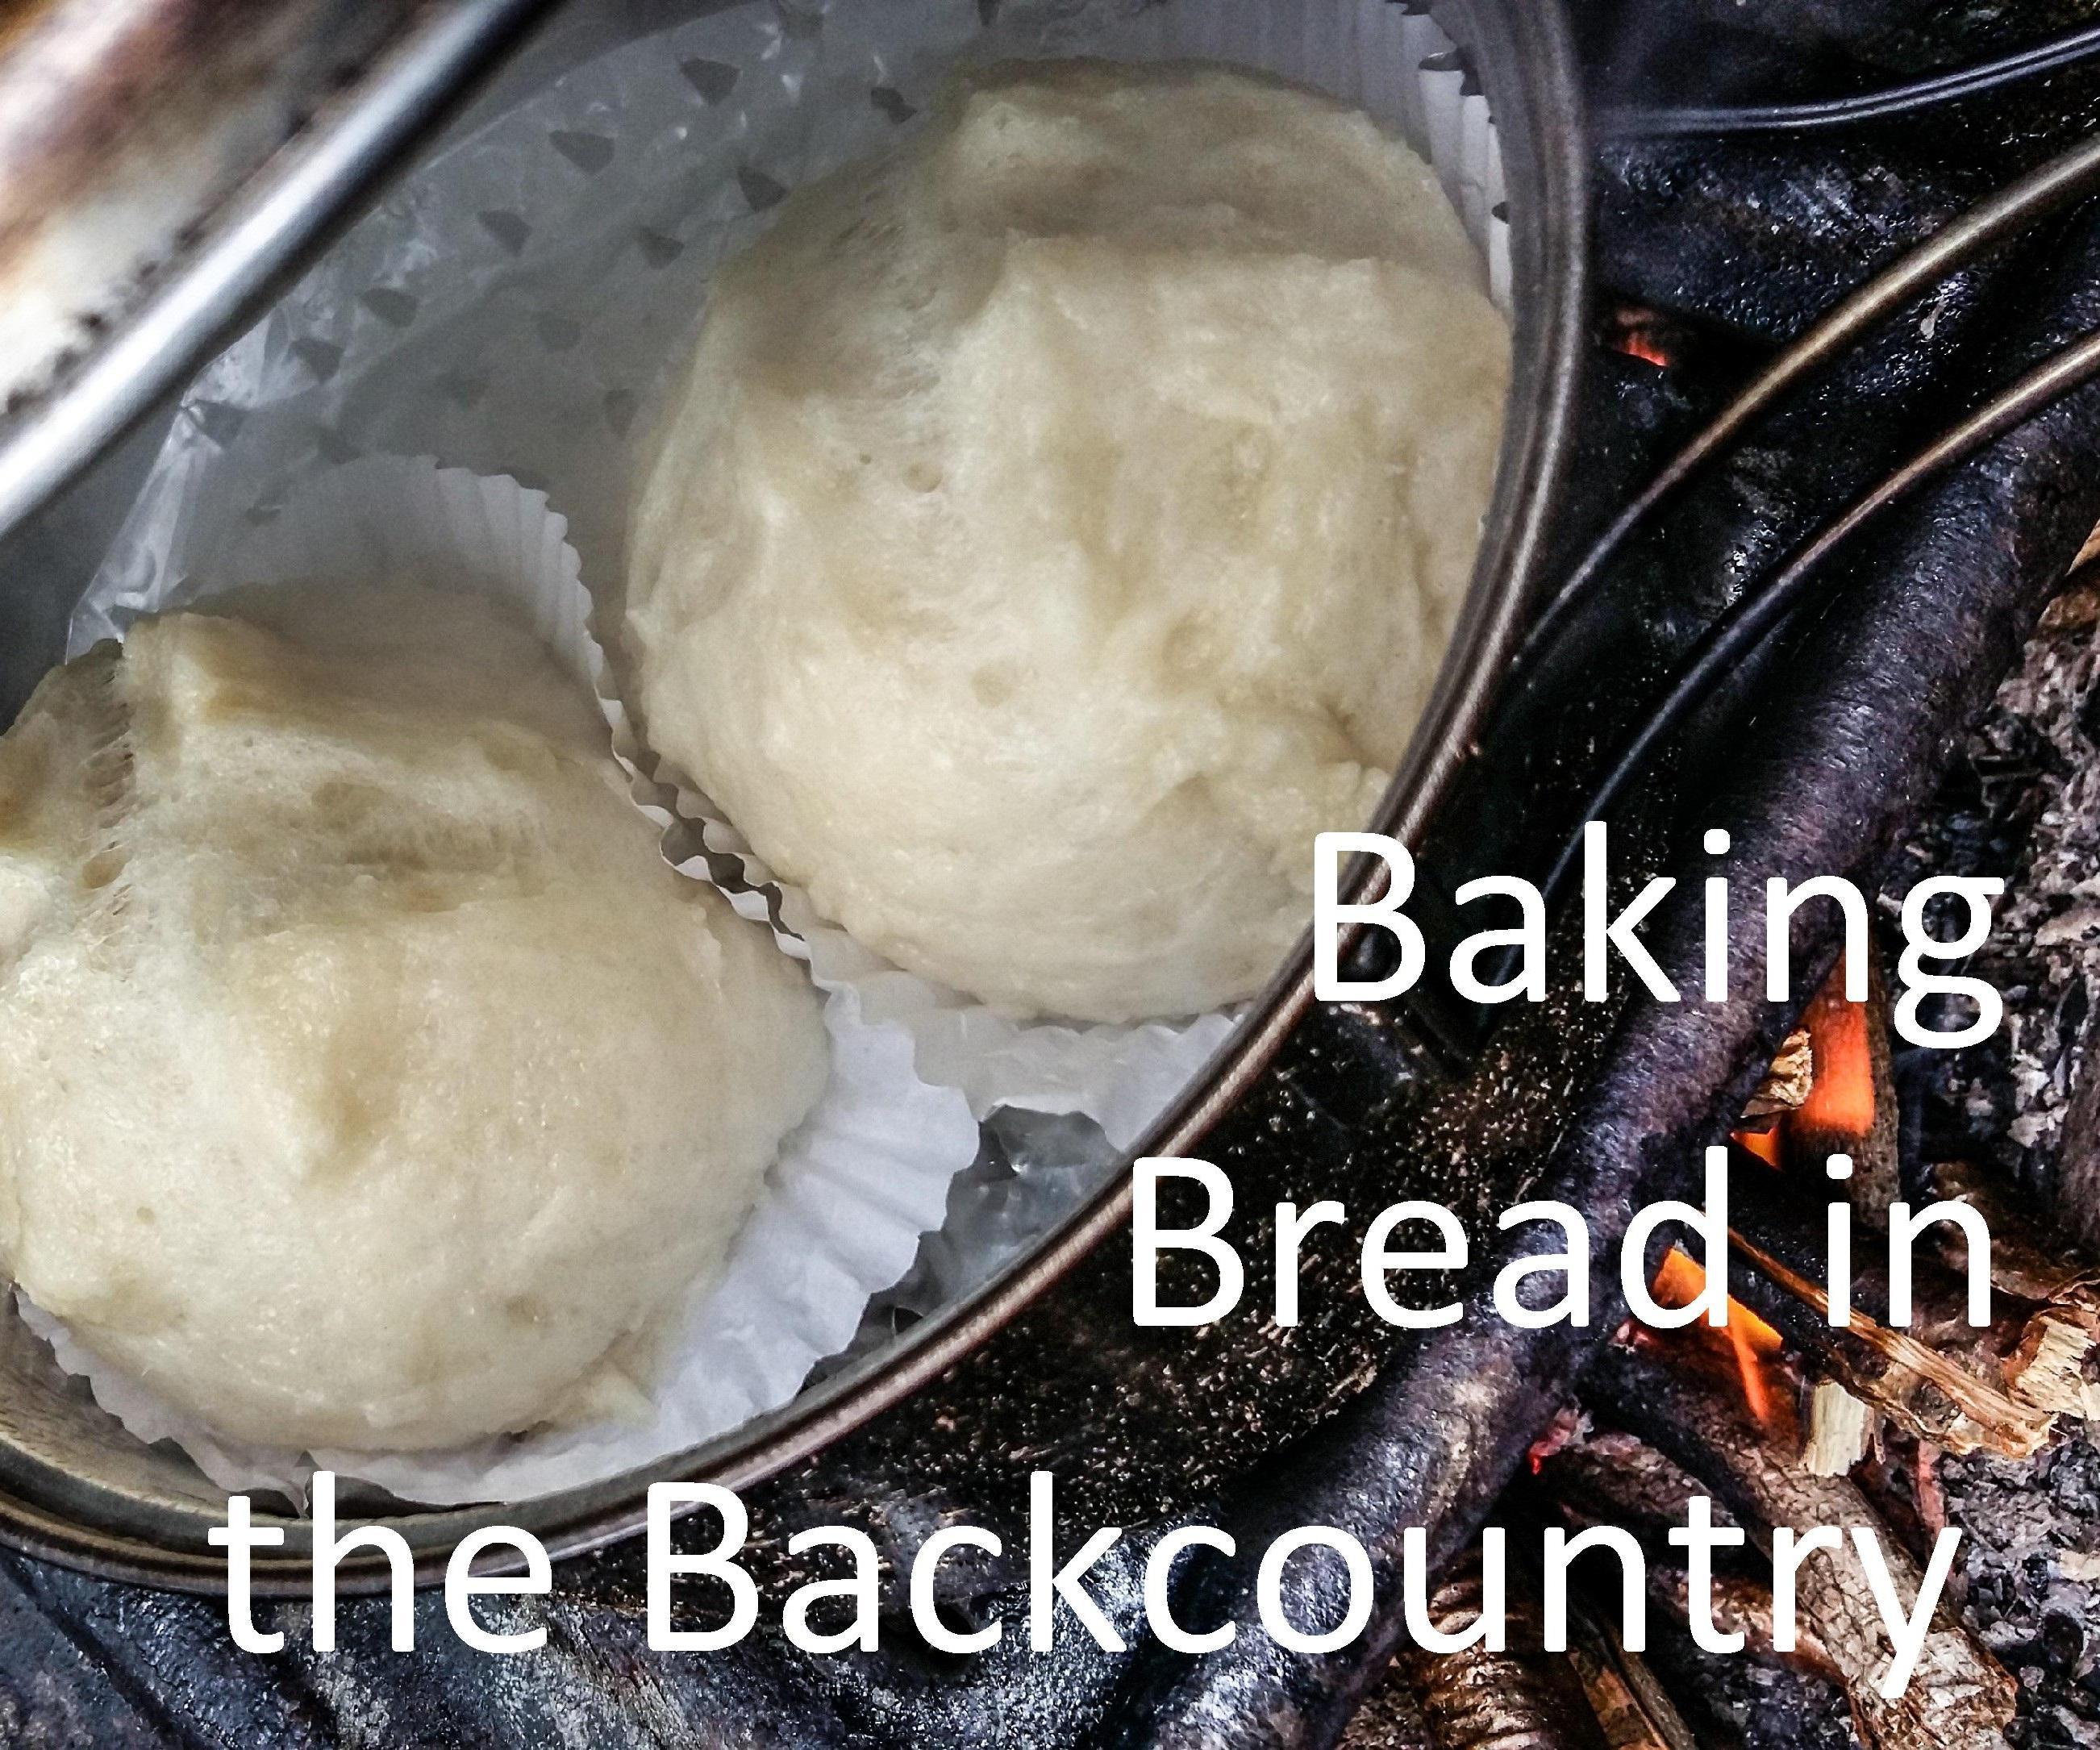 Baking Bread in the Backcountry